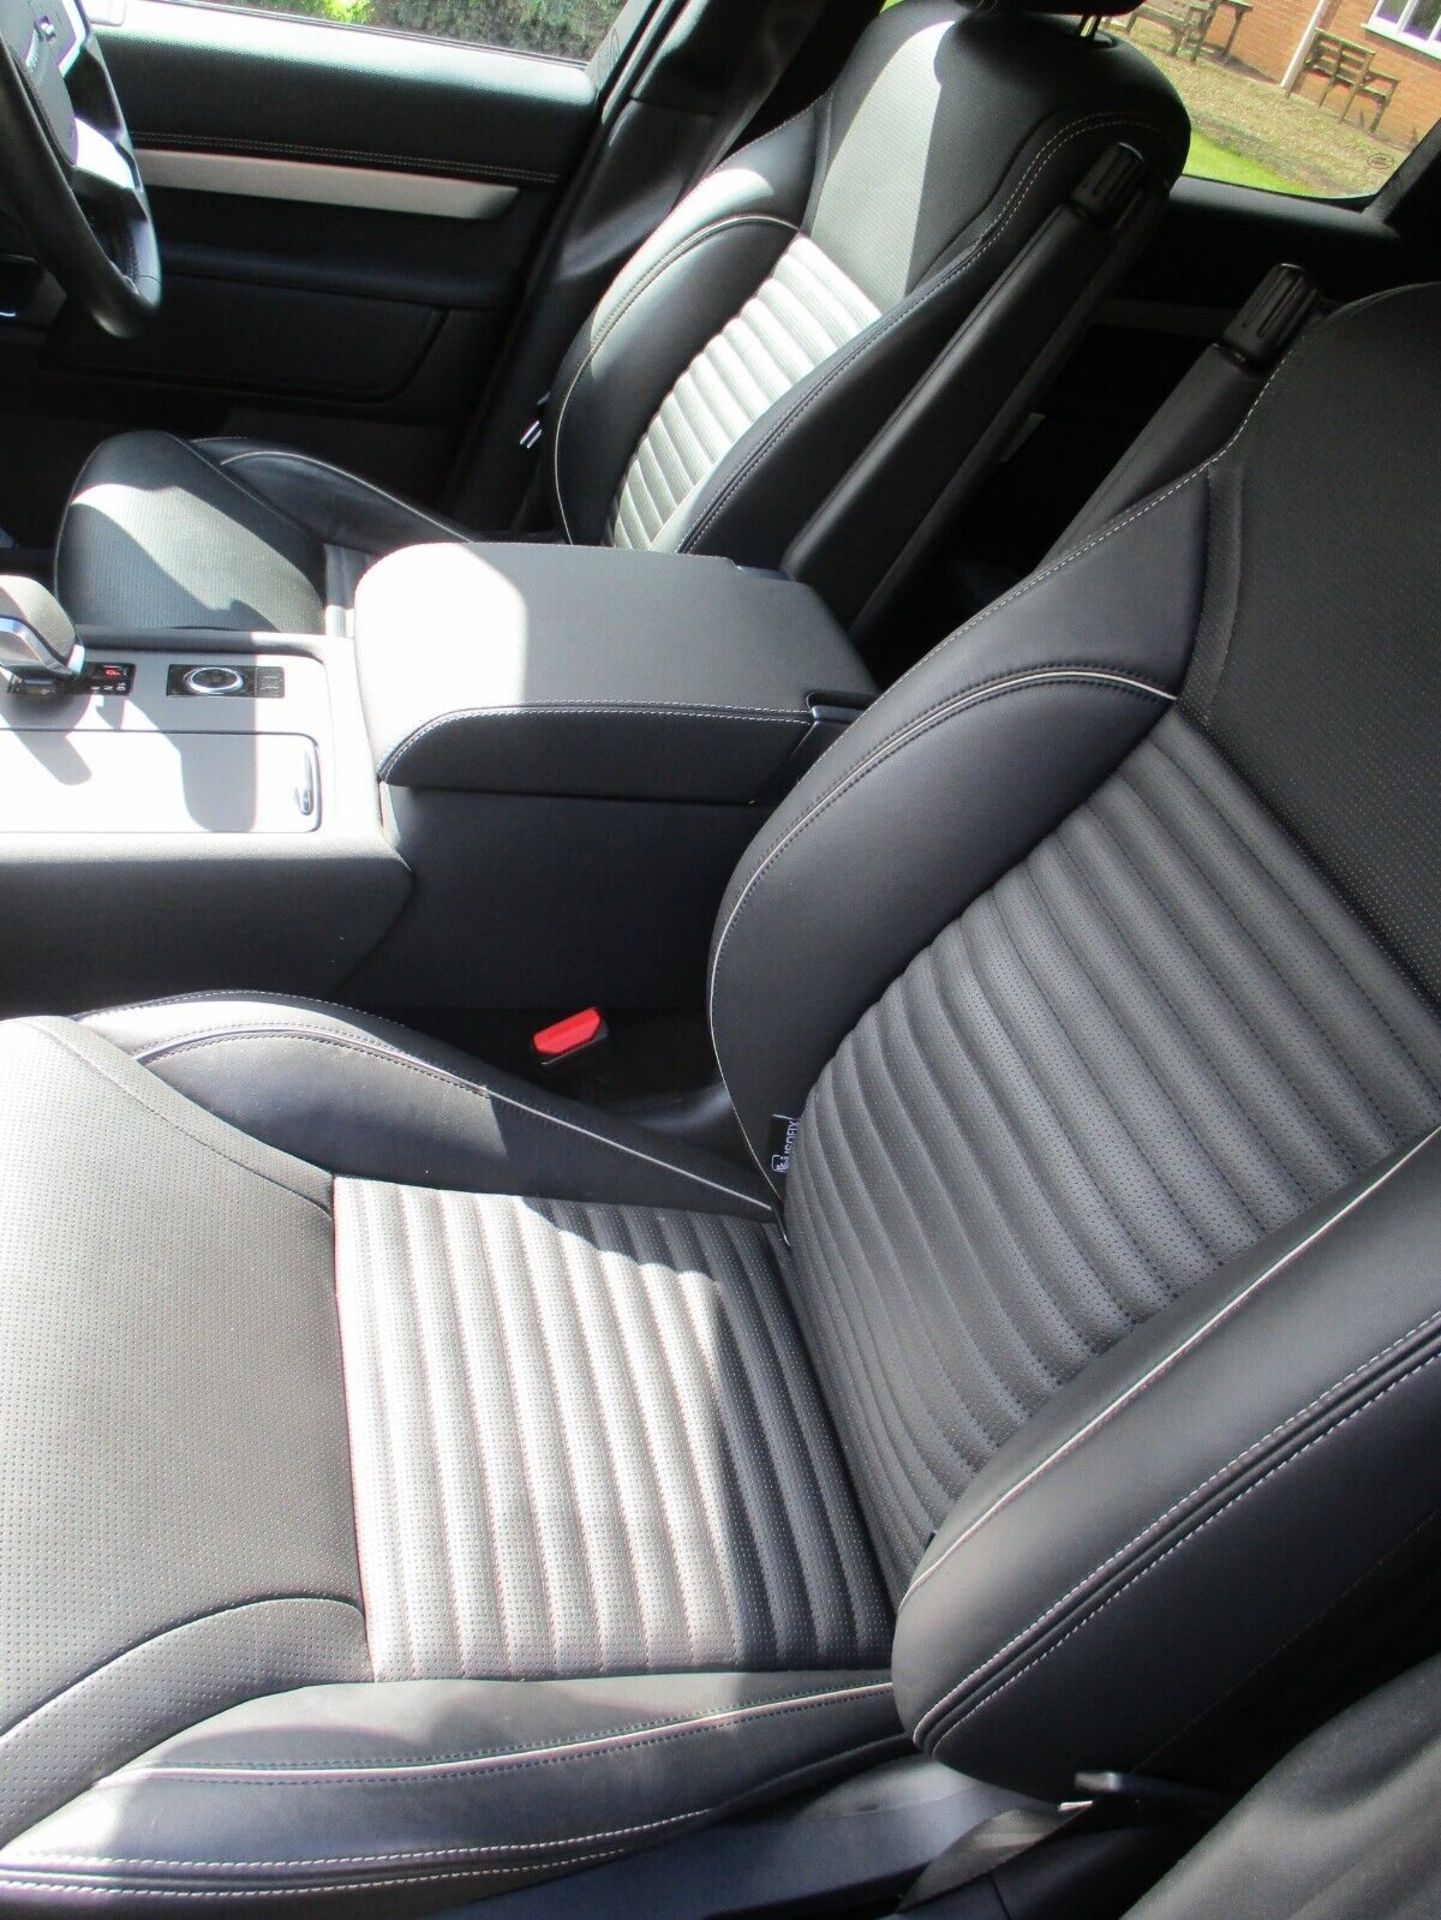 2022 LAND ROVER DISCOVERY R DYNAMIC HSE - RARE REAR SEAT CONVERSION - IMMACULATE CONDITION! - Image 15 of 18